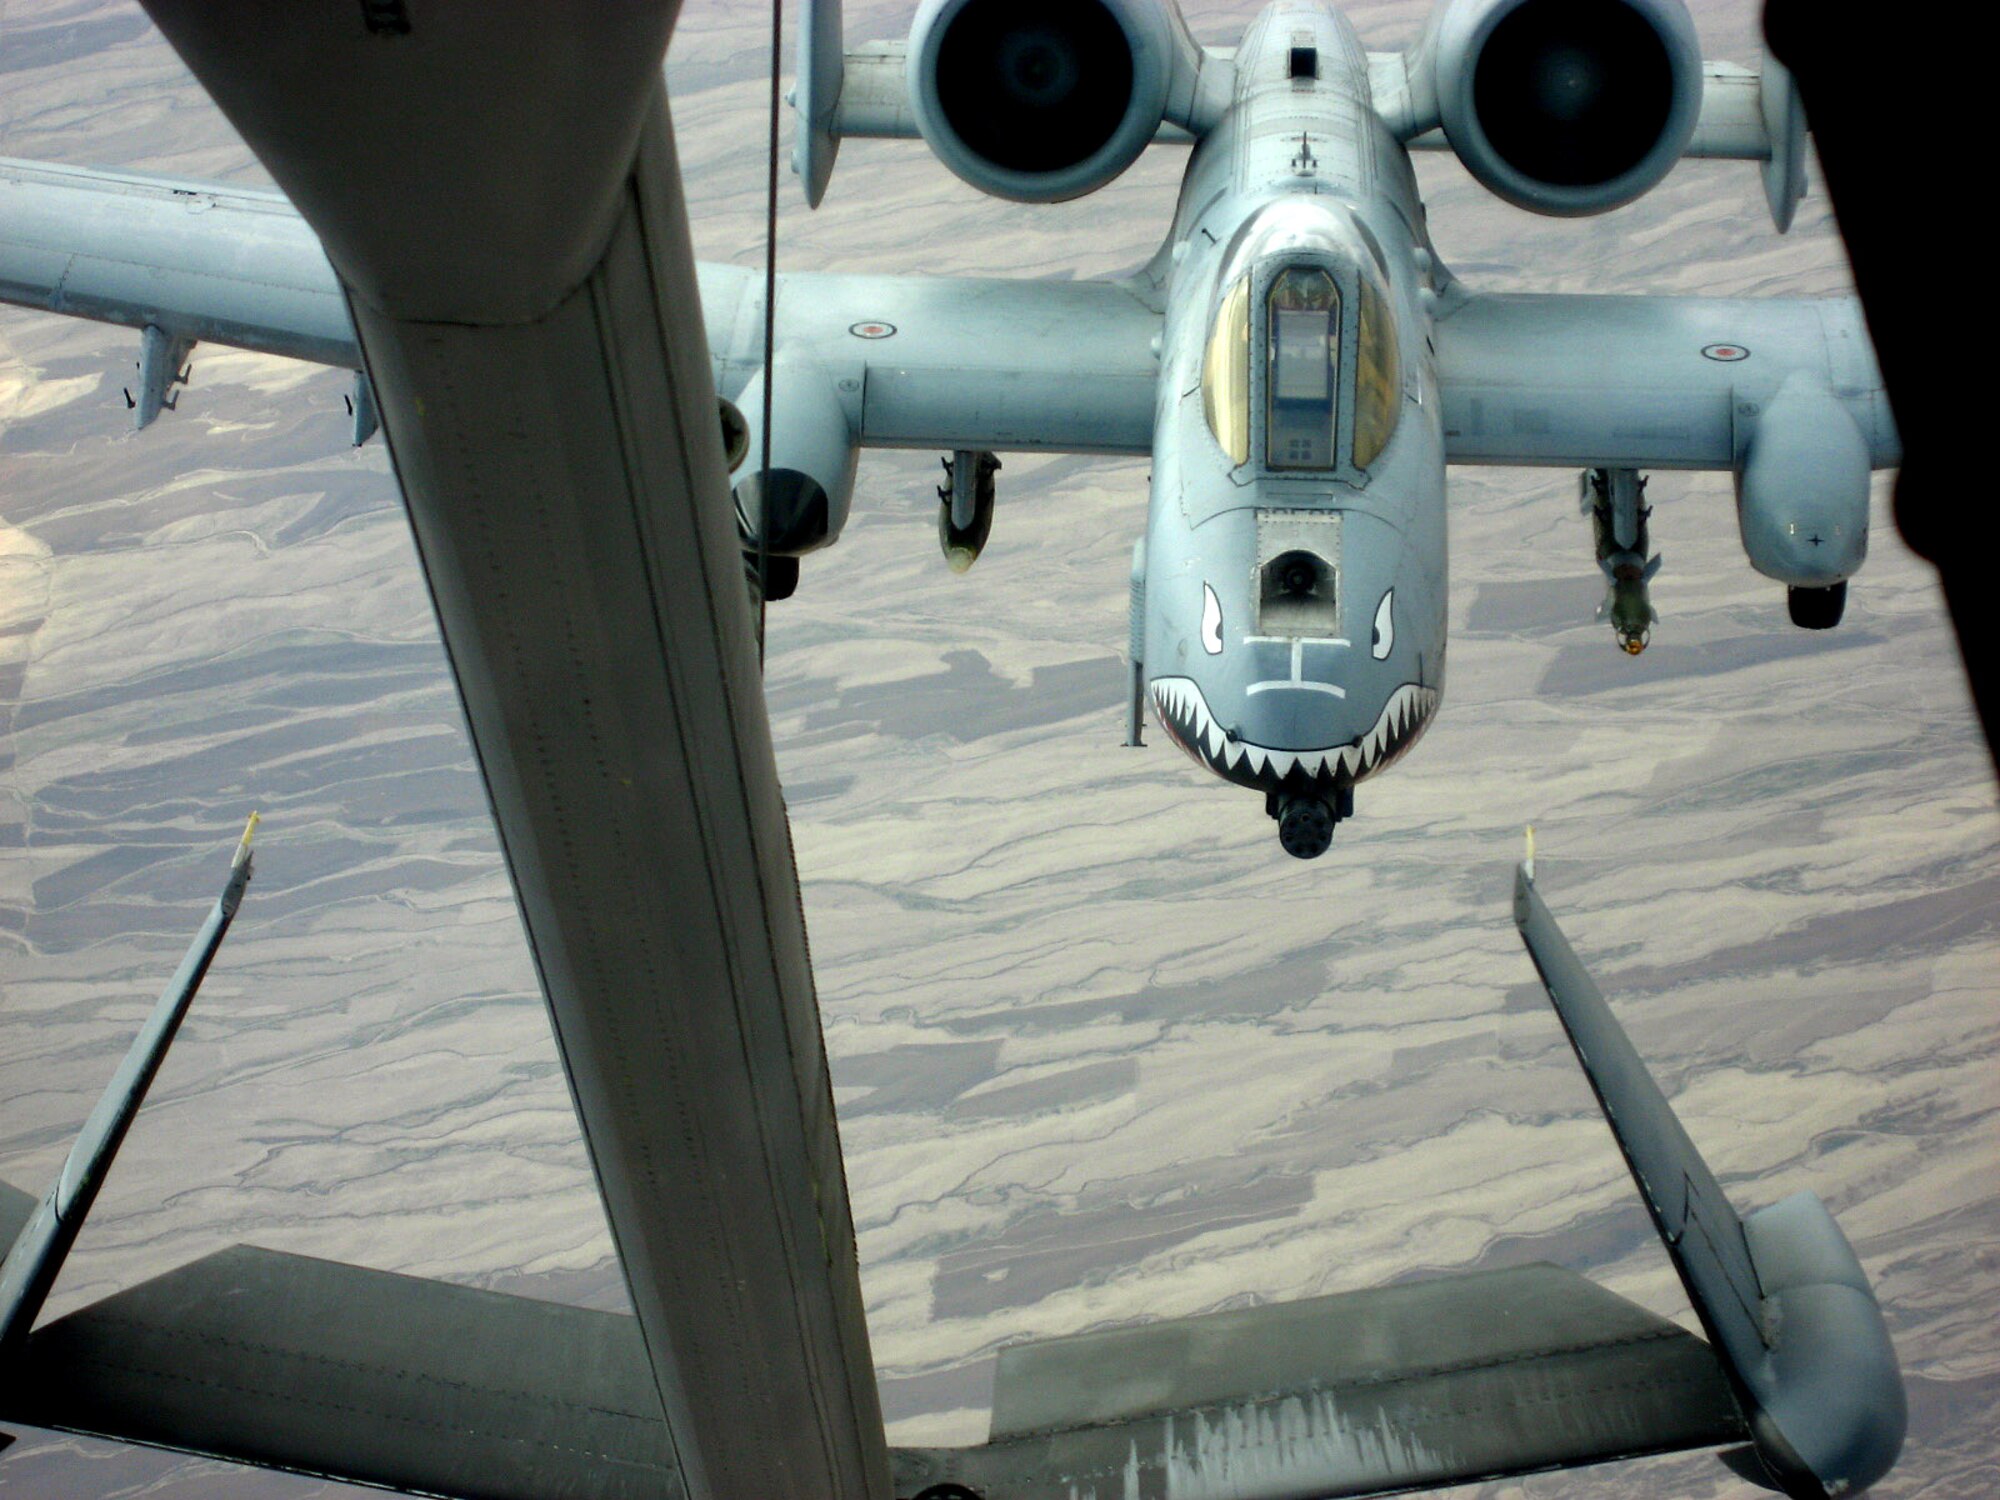 An A-10 Thunderbolt II needing fuel pulls up behind a KC-10 Extender flying over Afghanistan Dec. 14. The tanker is from the 380th Air Expeditionary Wing, home of the largest air refueling wing in Southwest Asia.  Unit aircrews fly KC-10s and KC-135 Stratotankers in support of wartime operations. (U.S. Air Force photo/Capt. Justin T. Watson)